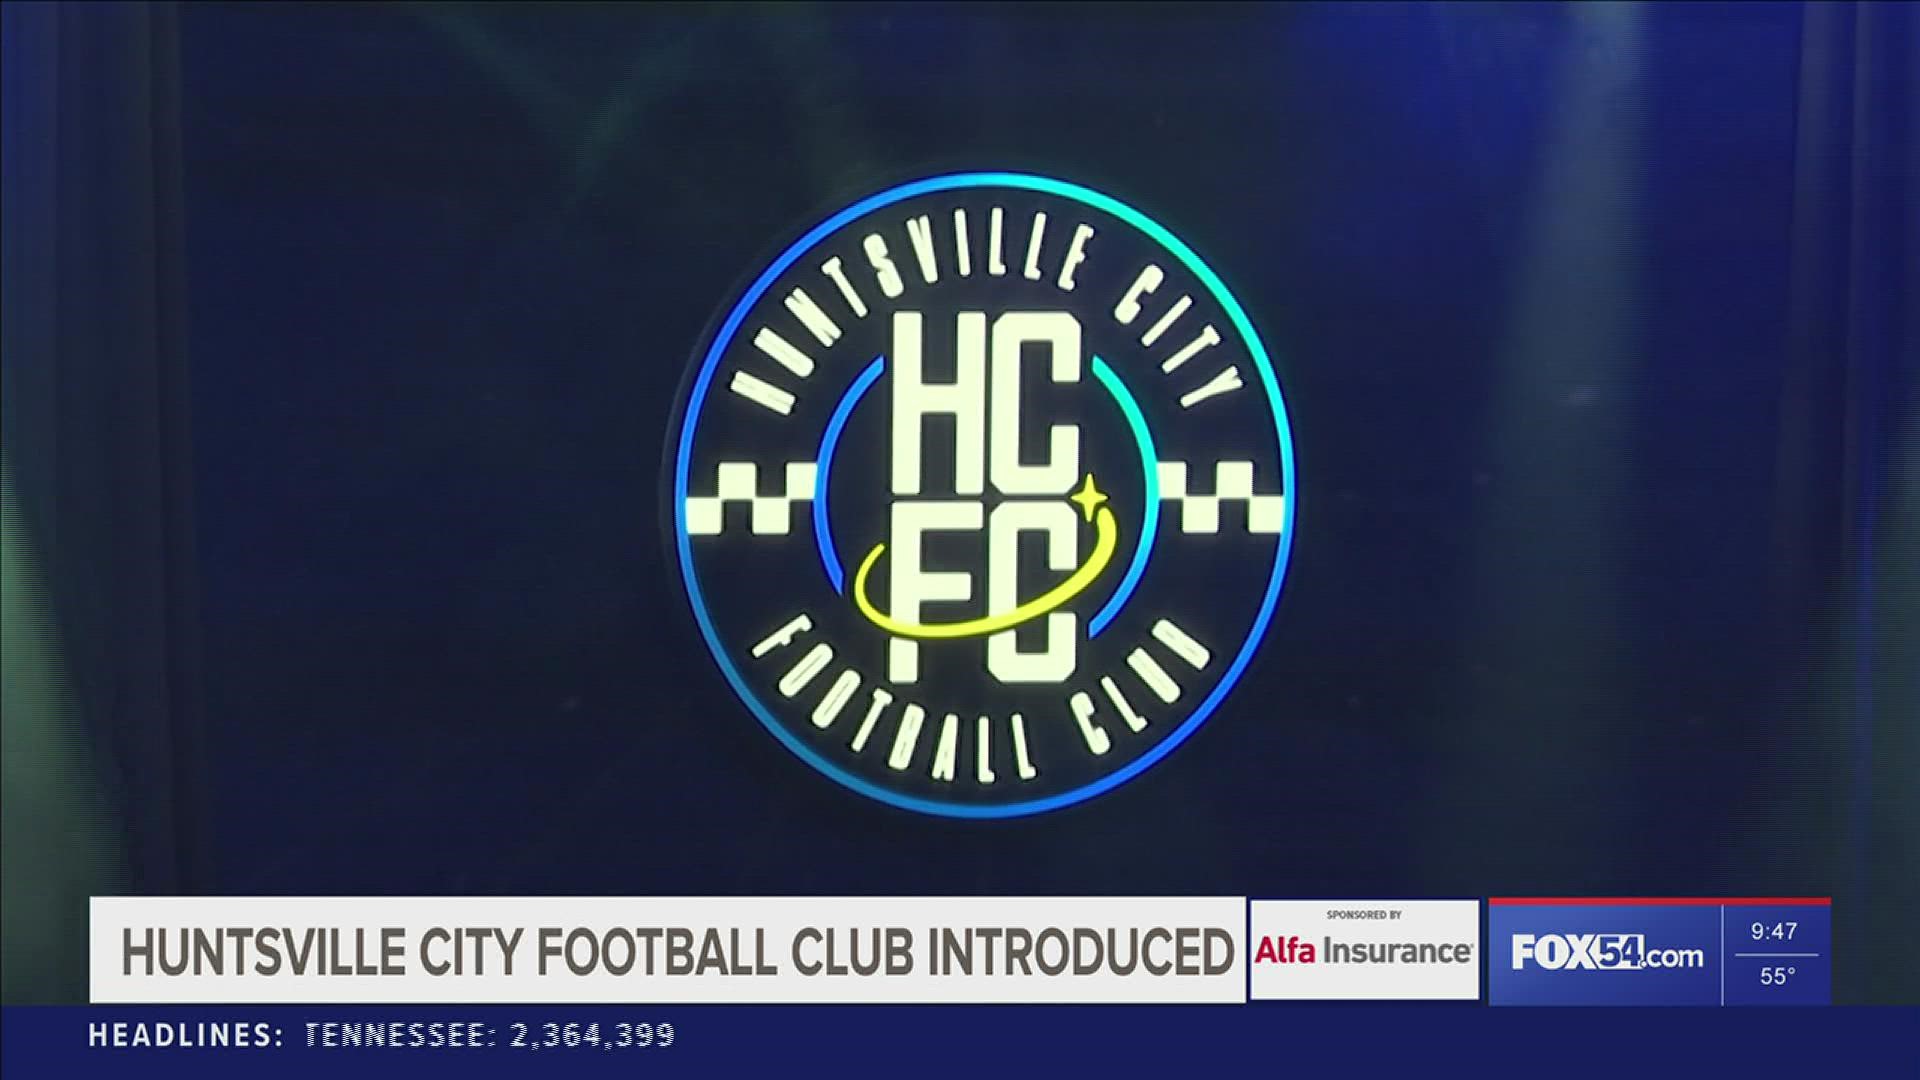 Huntsville City Football Club will make debut next season in the Rocket City. On Wednesday, the logo and brand were unveiled to the public